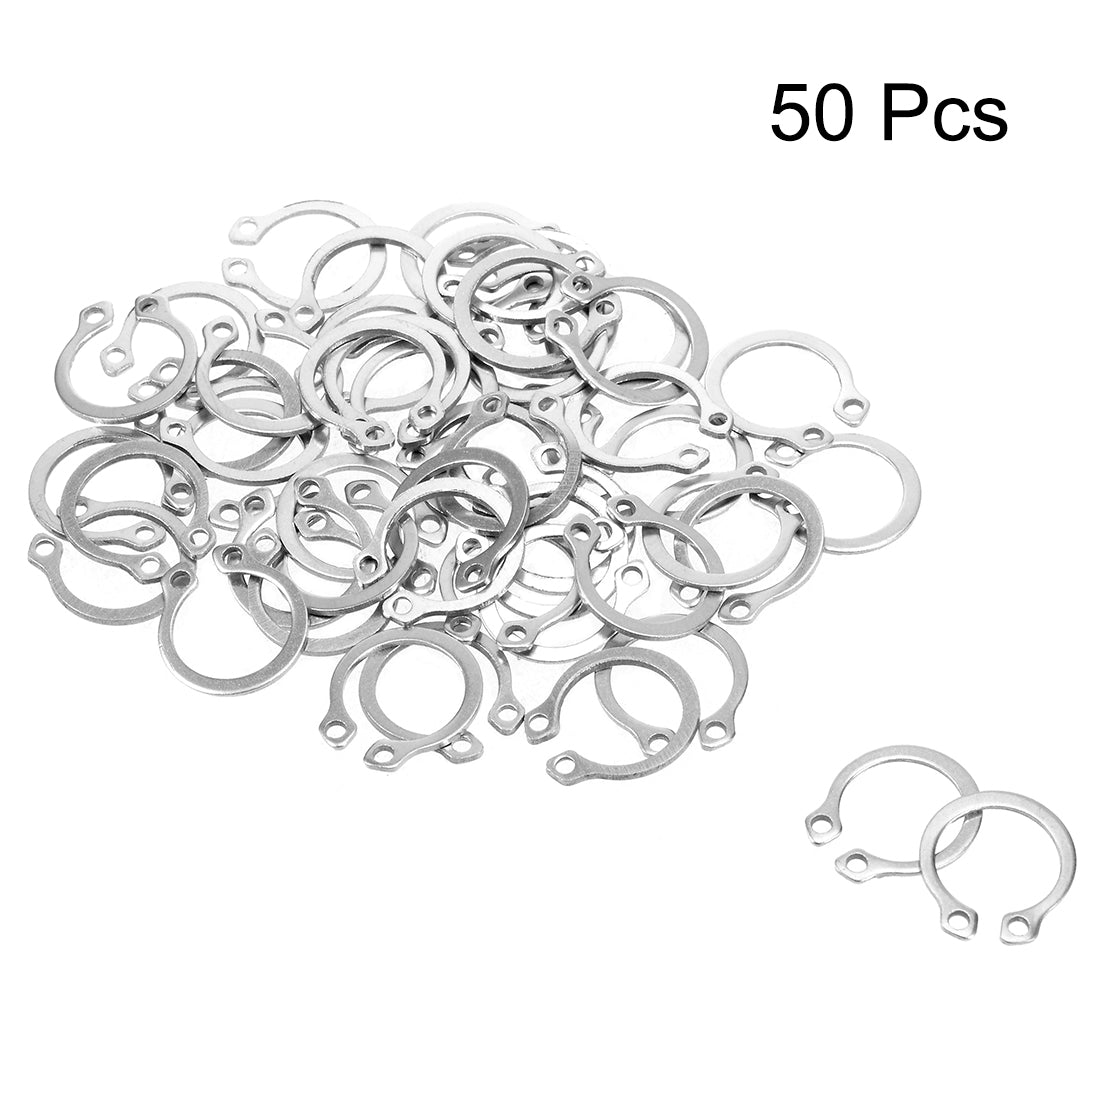 uxcell Uxcell 16mm External Circlips Retaining Shaft Snap Rings 304 Stainless Steel 50pcs